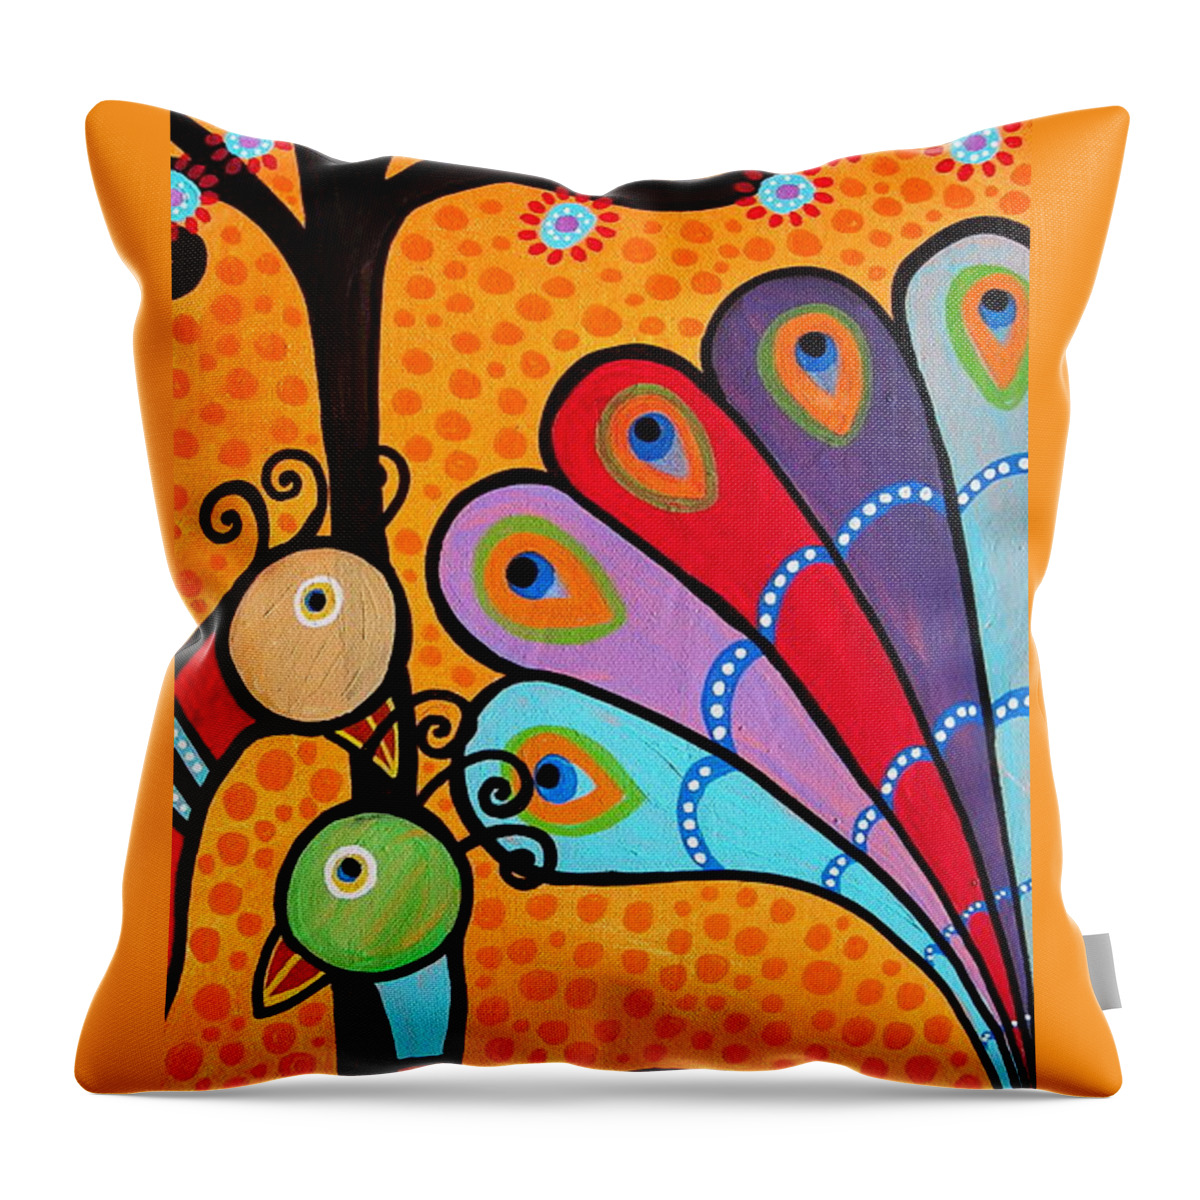 Abstract Throw Pillow featuring the painting 2 Peacocks And Tree by Pristine Cartera Turkus